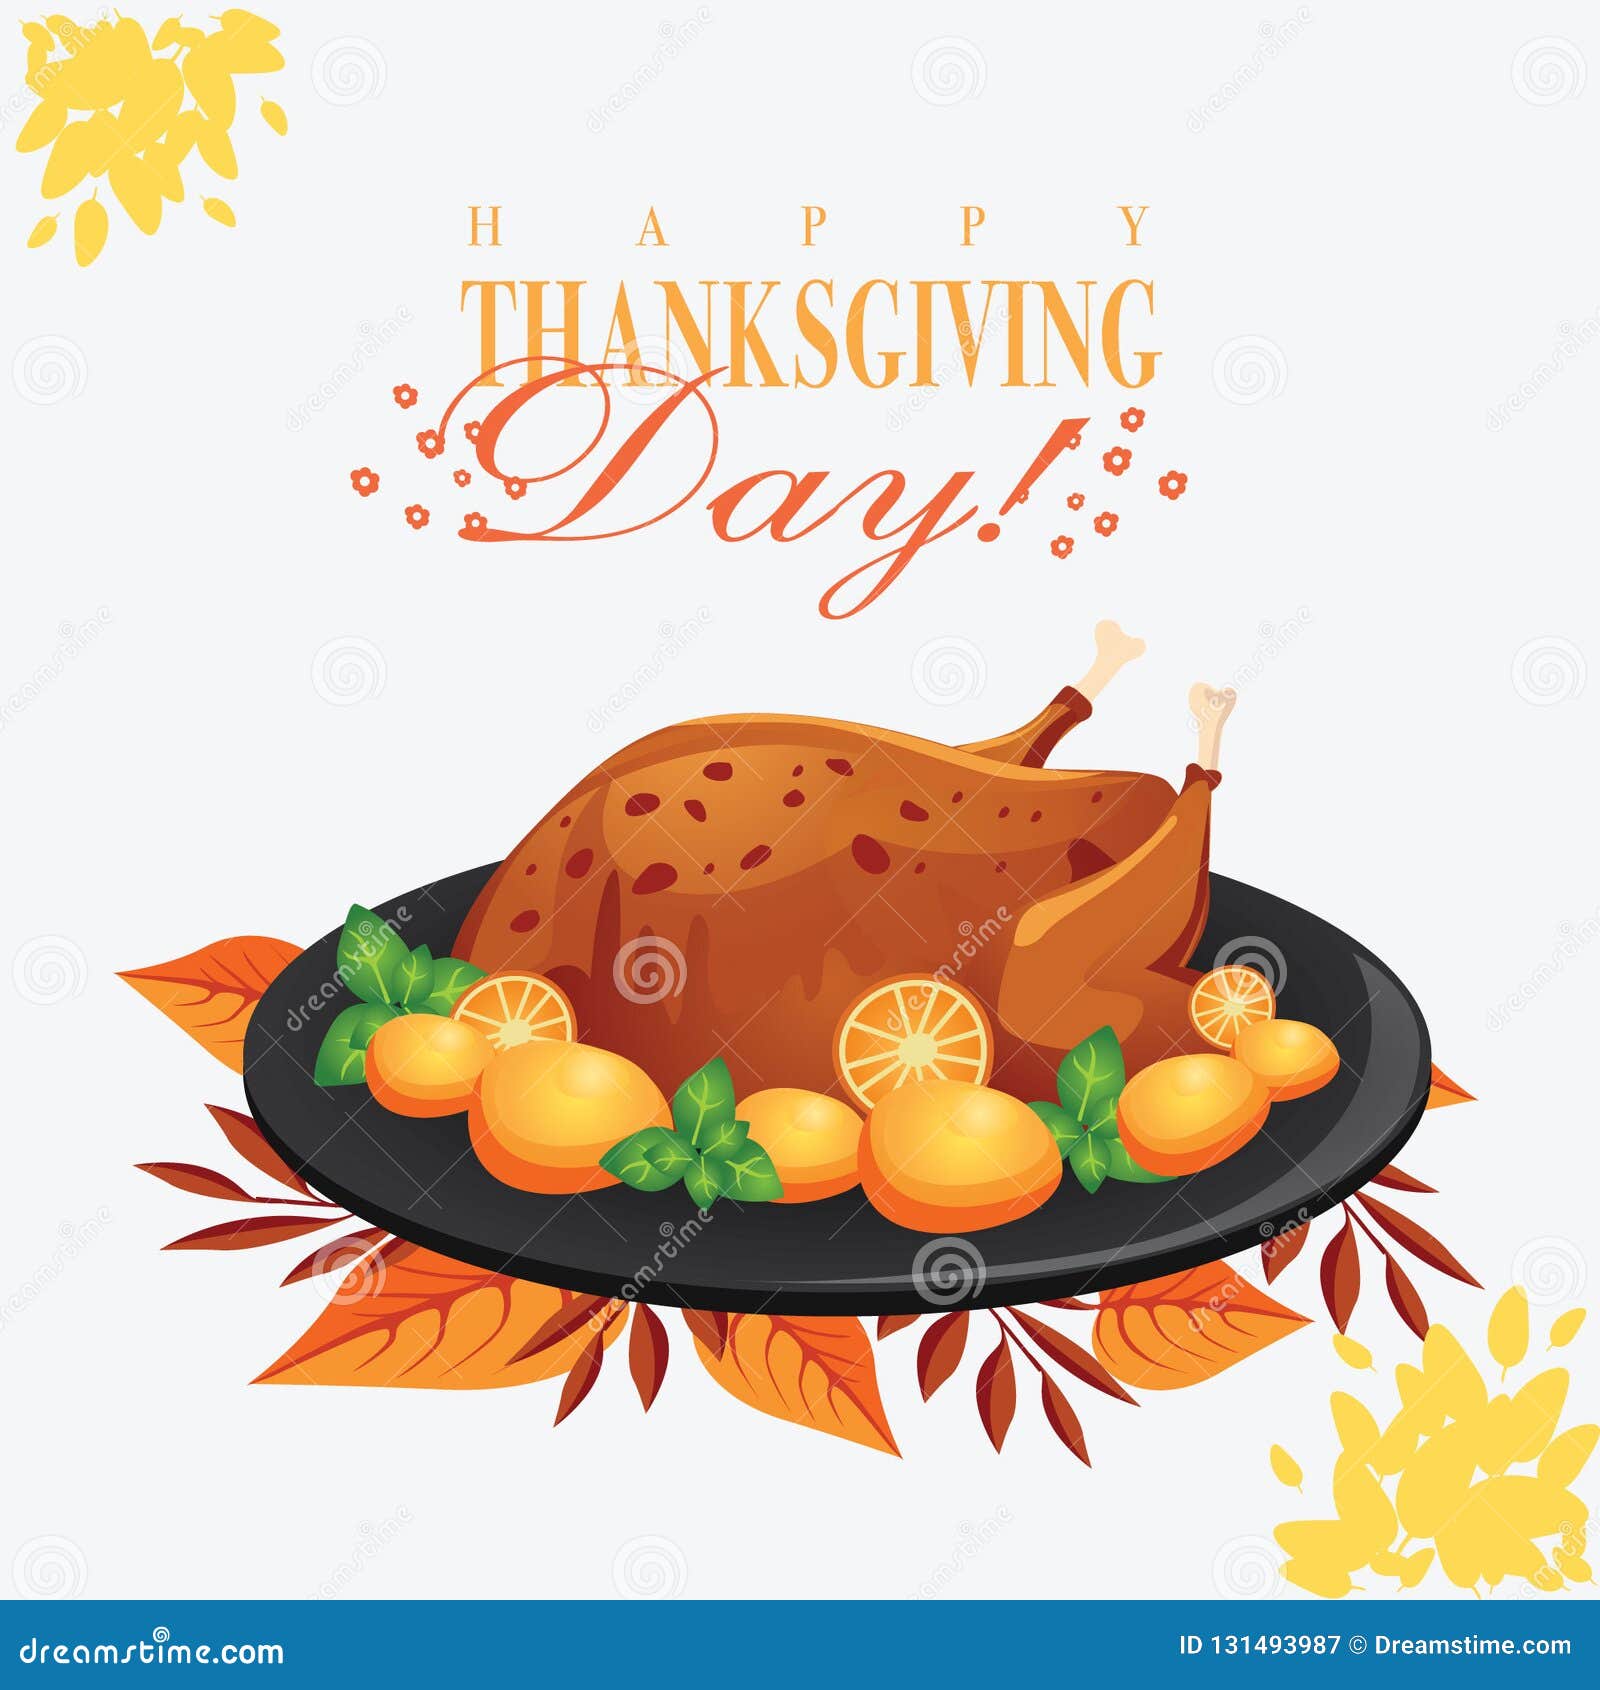 Thanksgiving Day Roasted Turkey on Black Plate Stock Vector ...